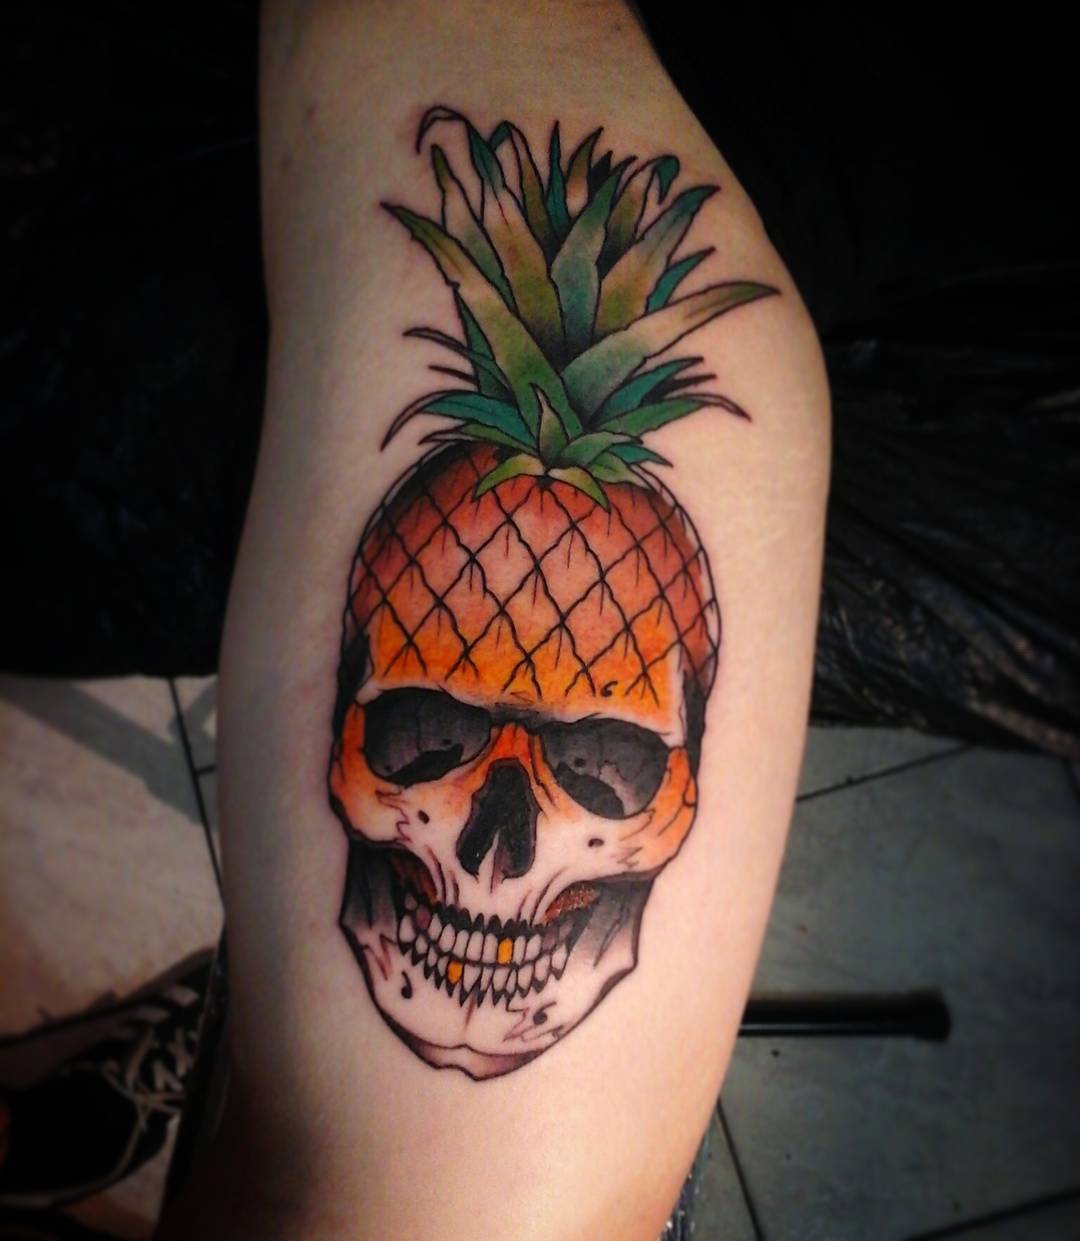 Fresh, swollen and bloody pineapple from today. Thanke you very much for your tr